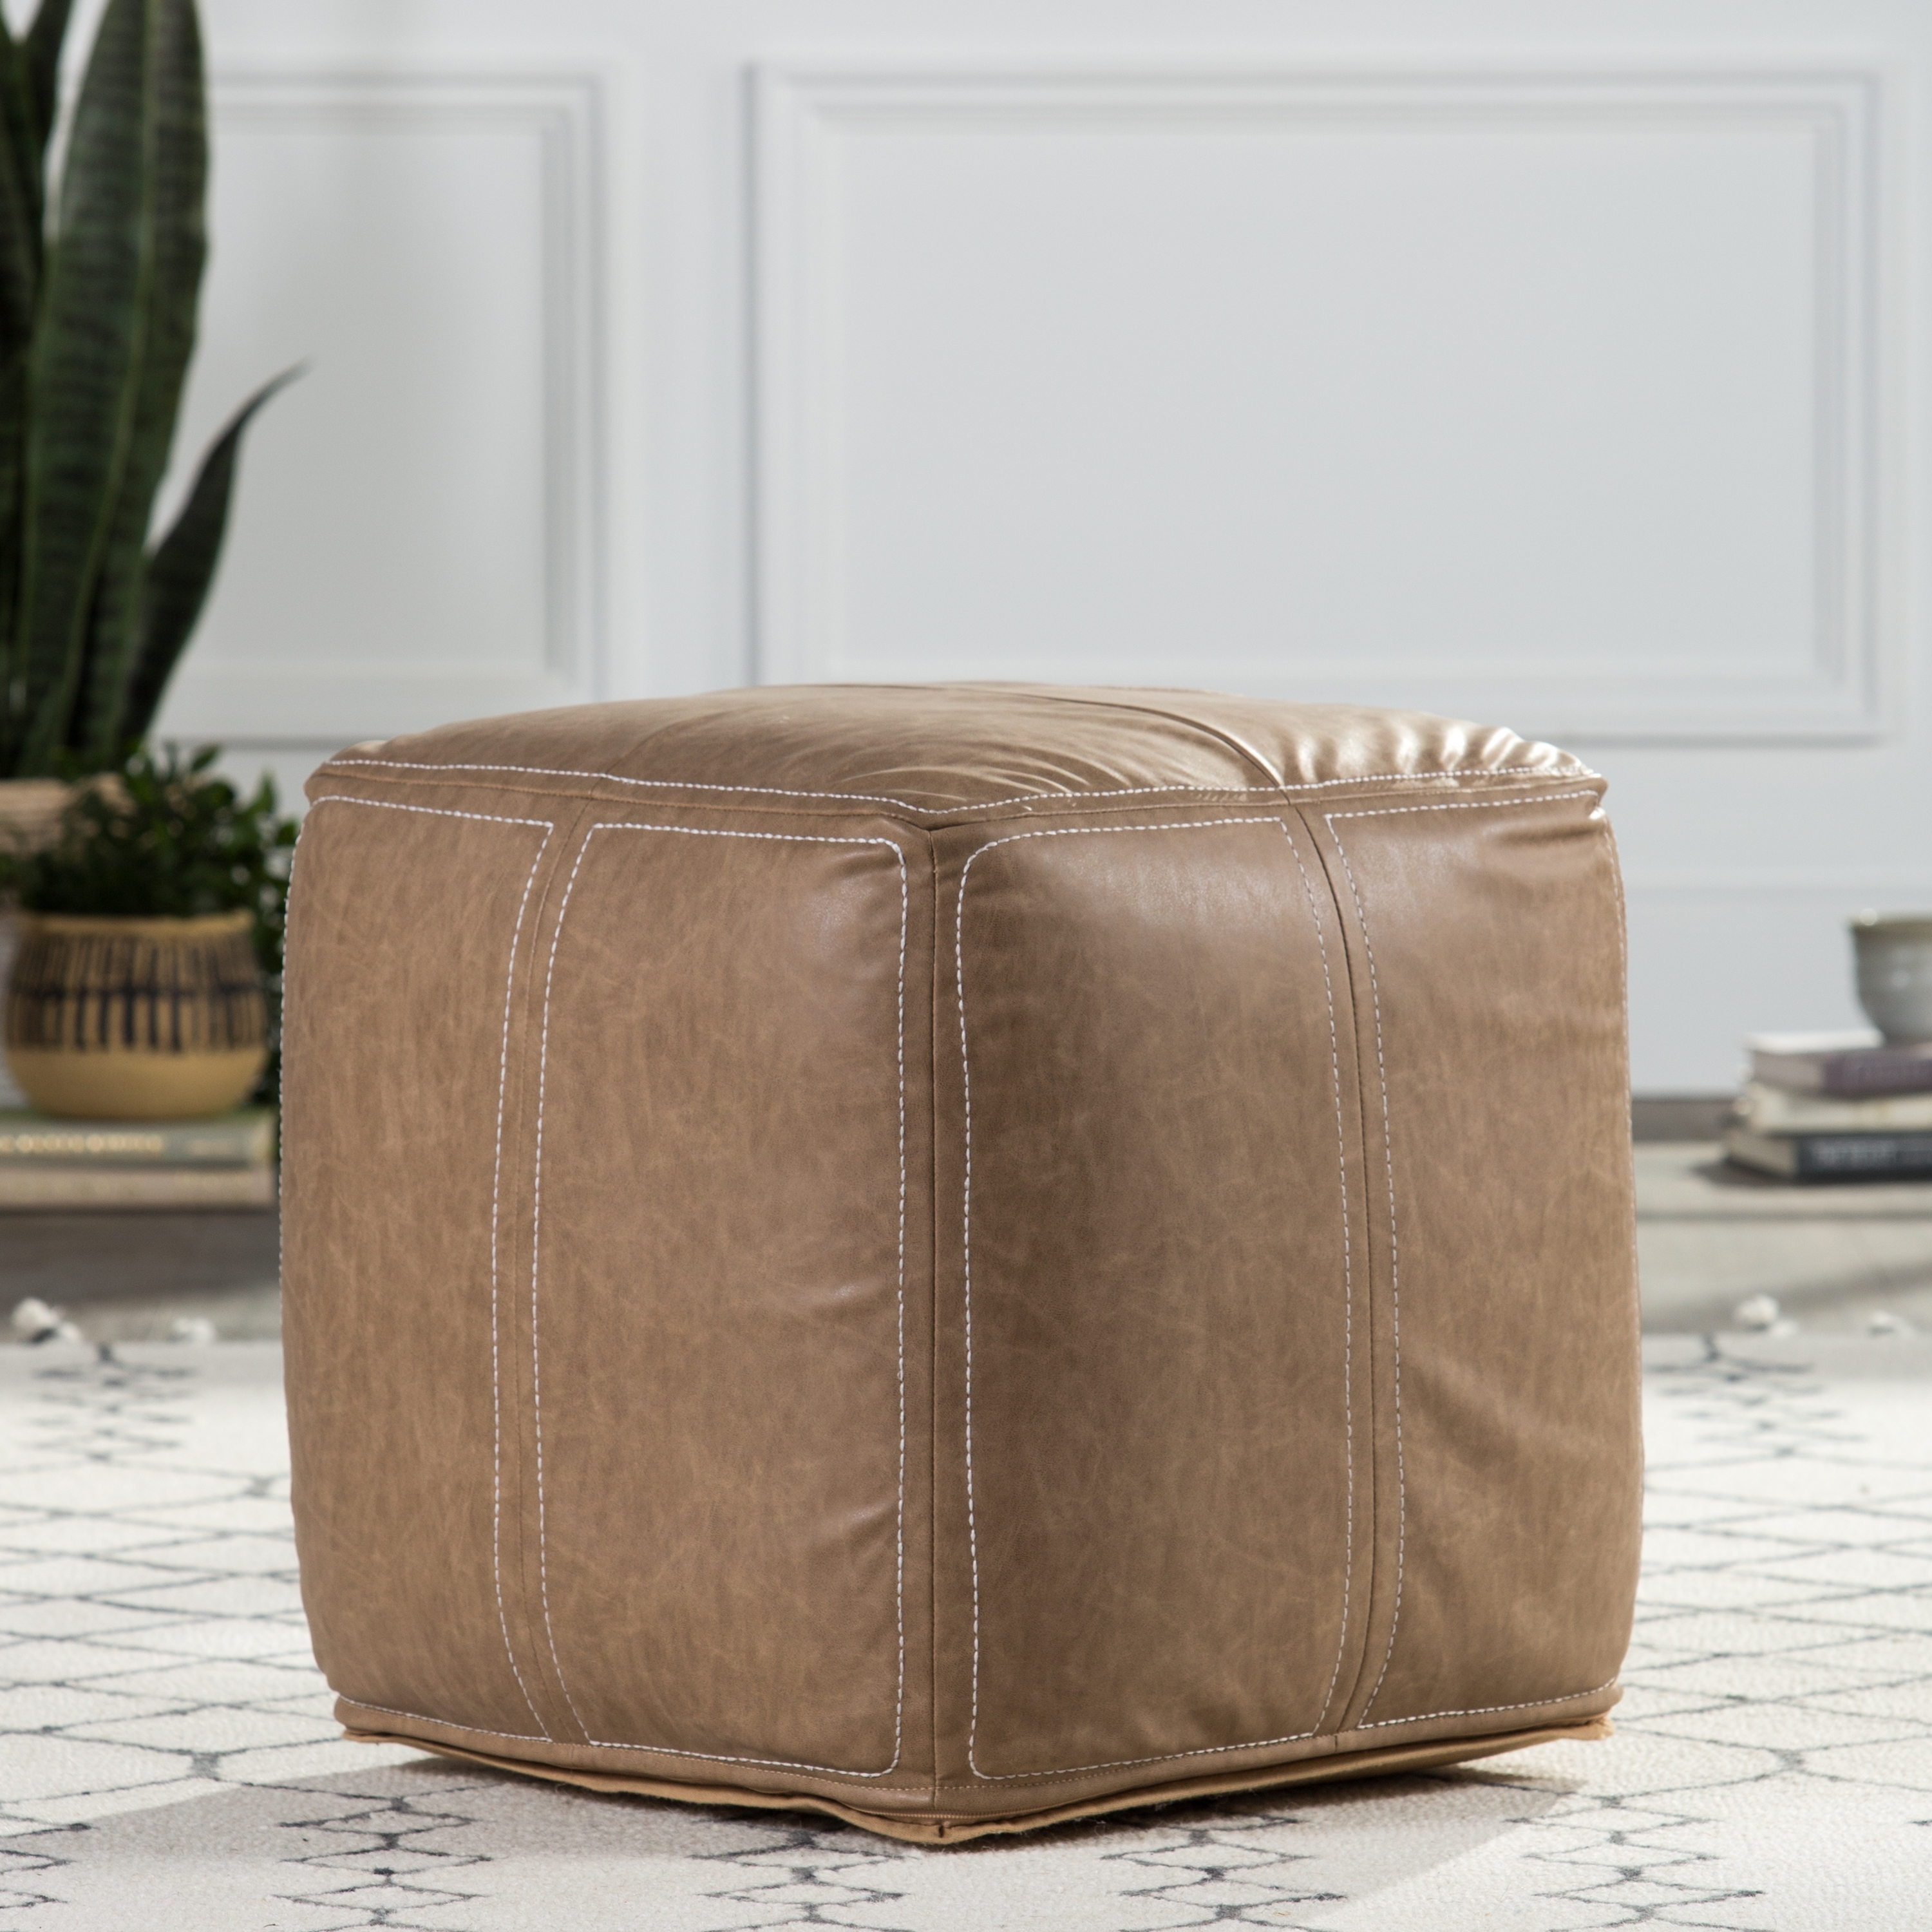 Nikki Chu by Suave Solid Taupe Cube Pouf - Image 1